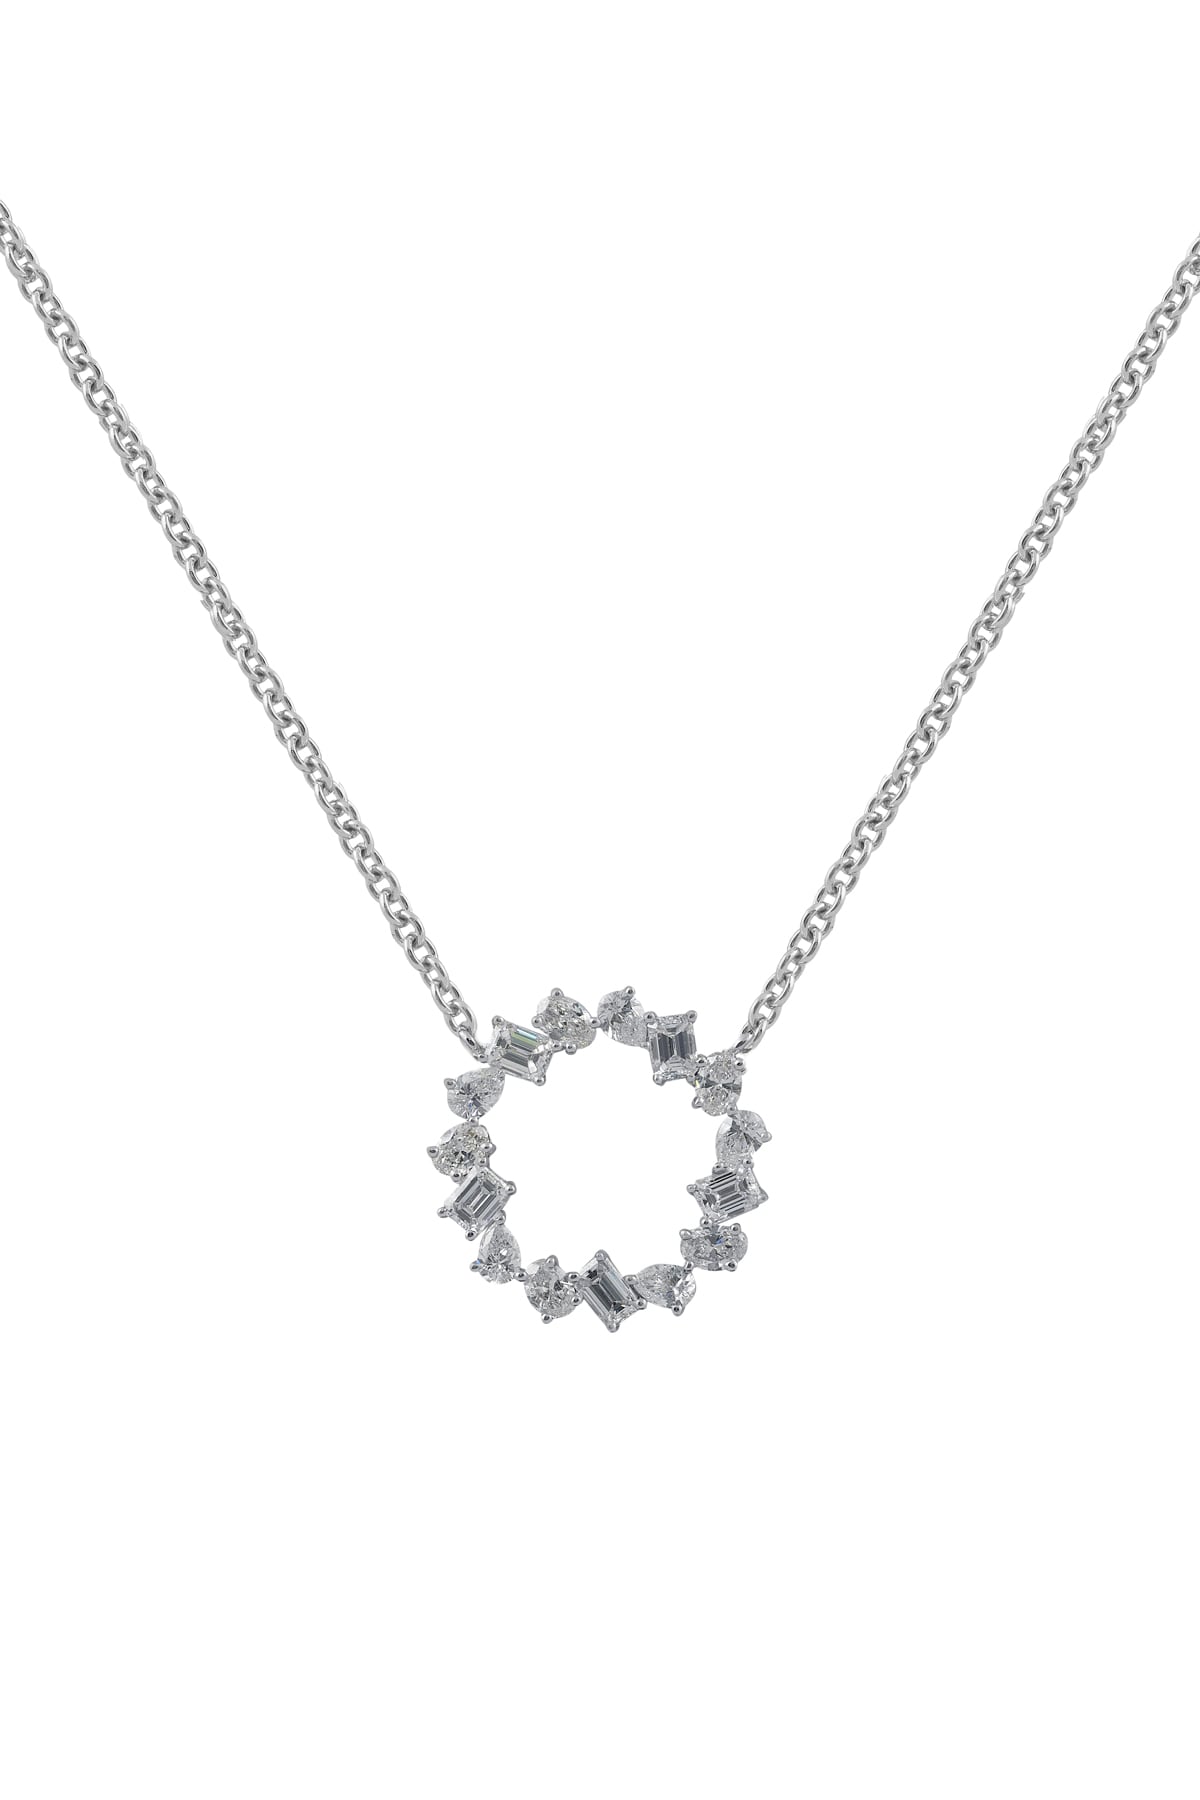 Diamond Set Fancy Circle Pendant with Chain in 18k White Gold from LeGassick Jewellery Gold Coast, Australia.